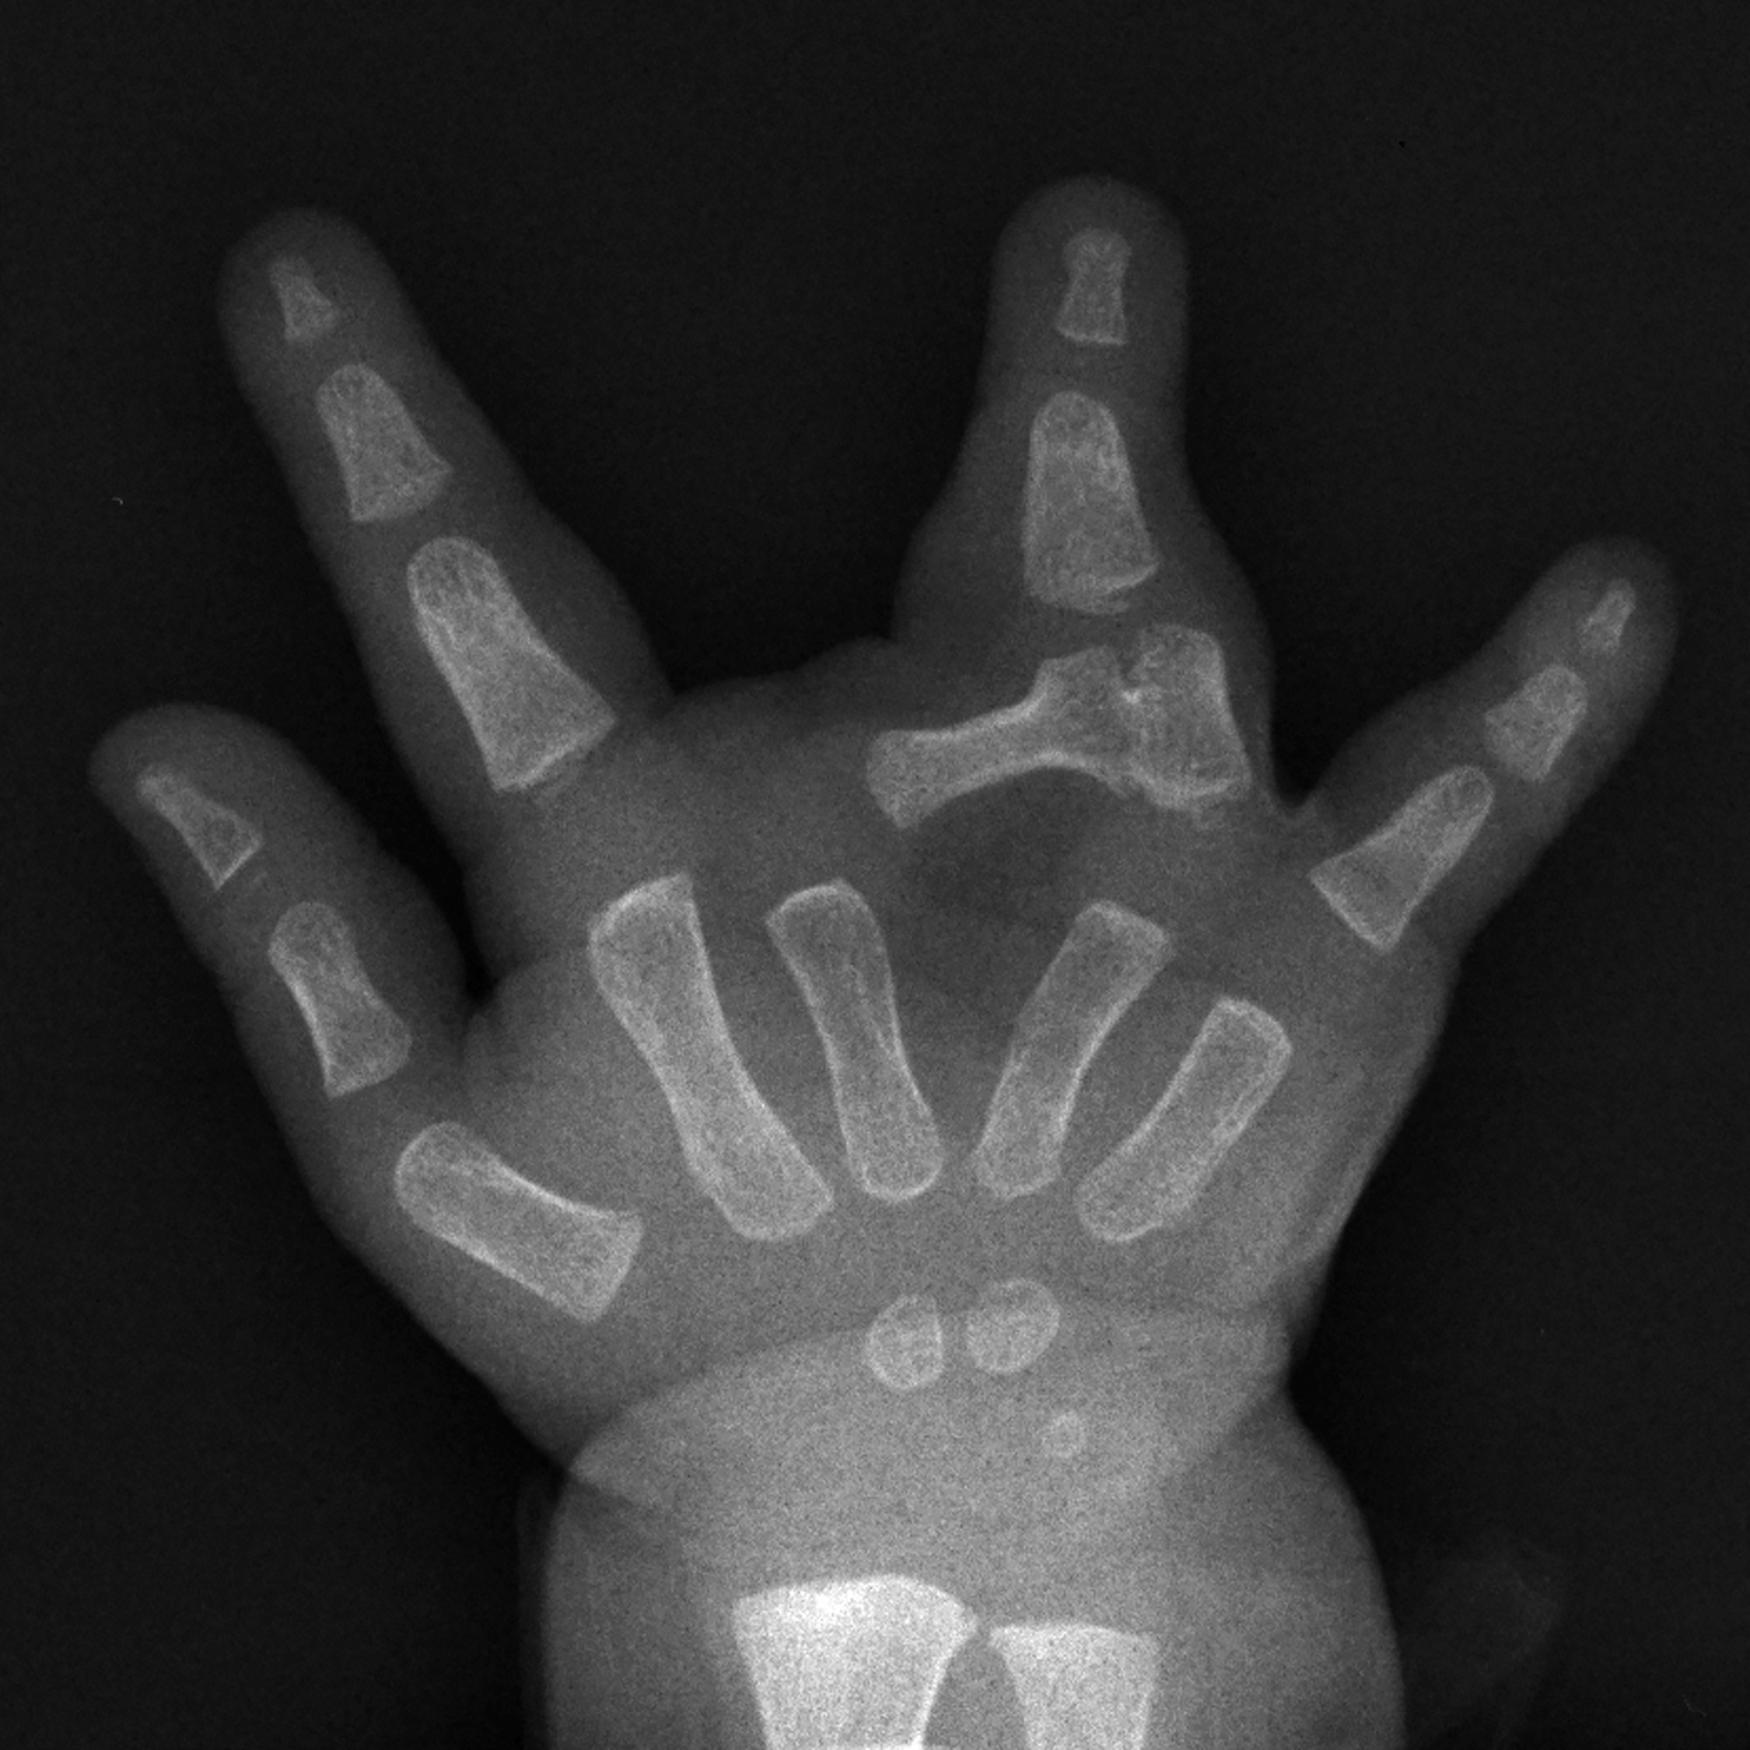 Fig. 36.60, X-ray of a 3-year-old with cleft hand. Anteroposterior view shows a proximal phalanx within the cleft oriented in a transverse direction.